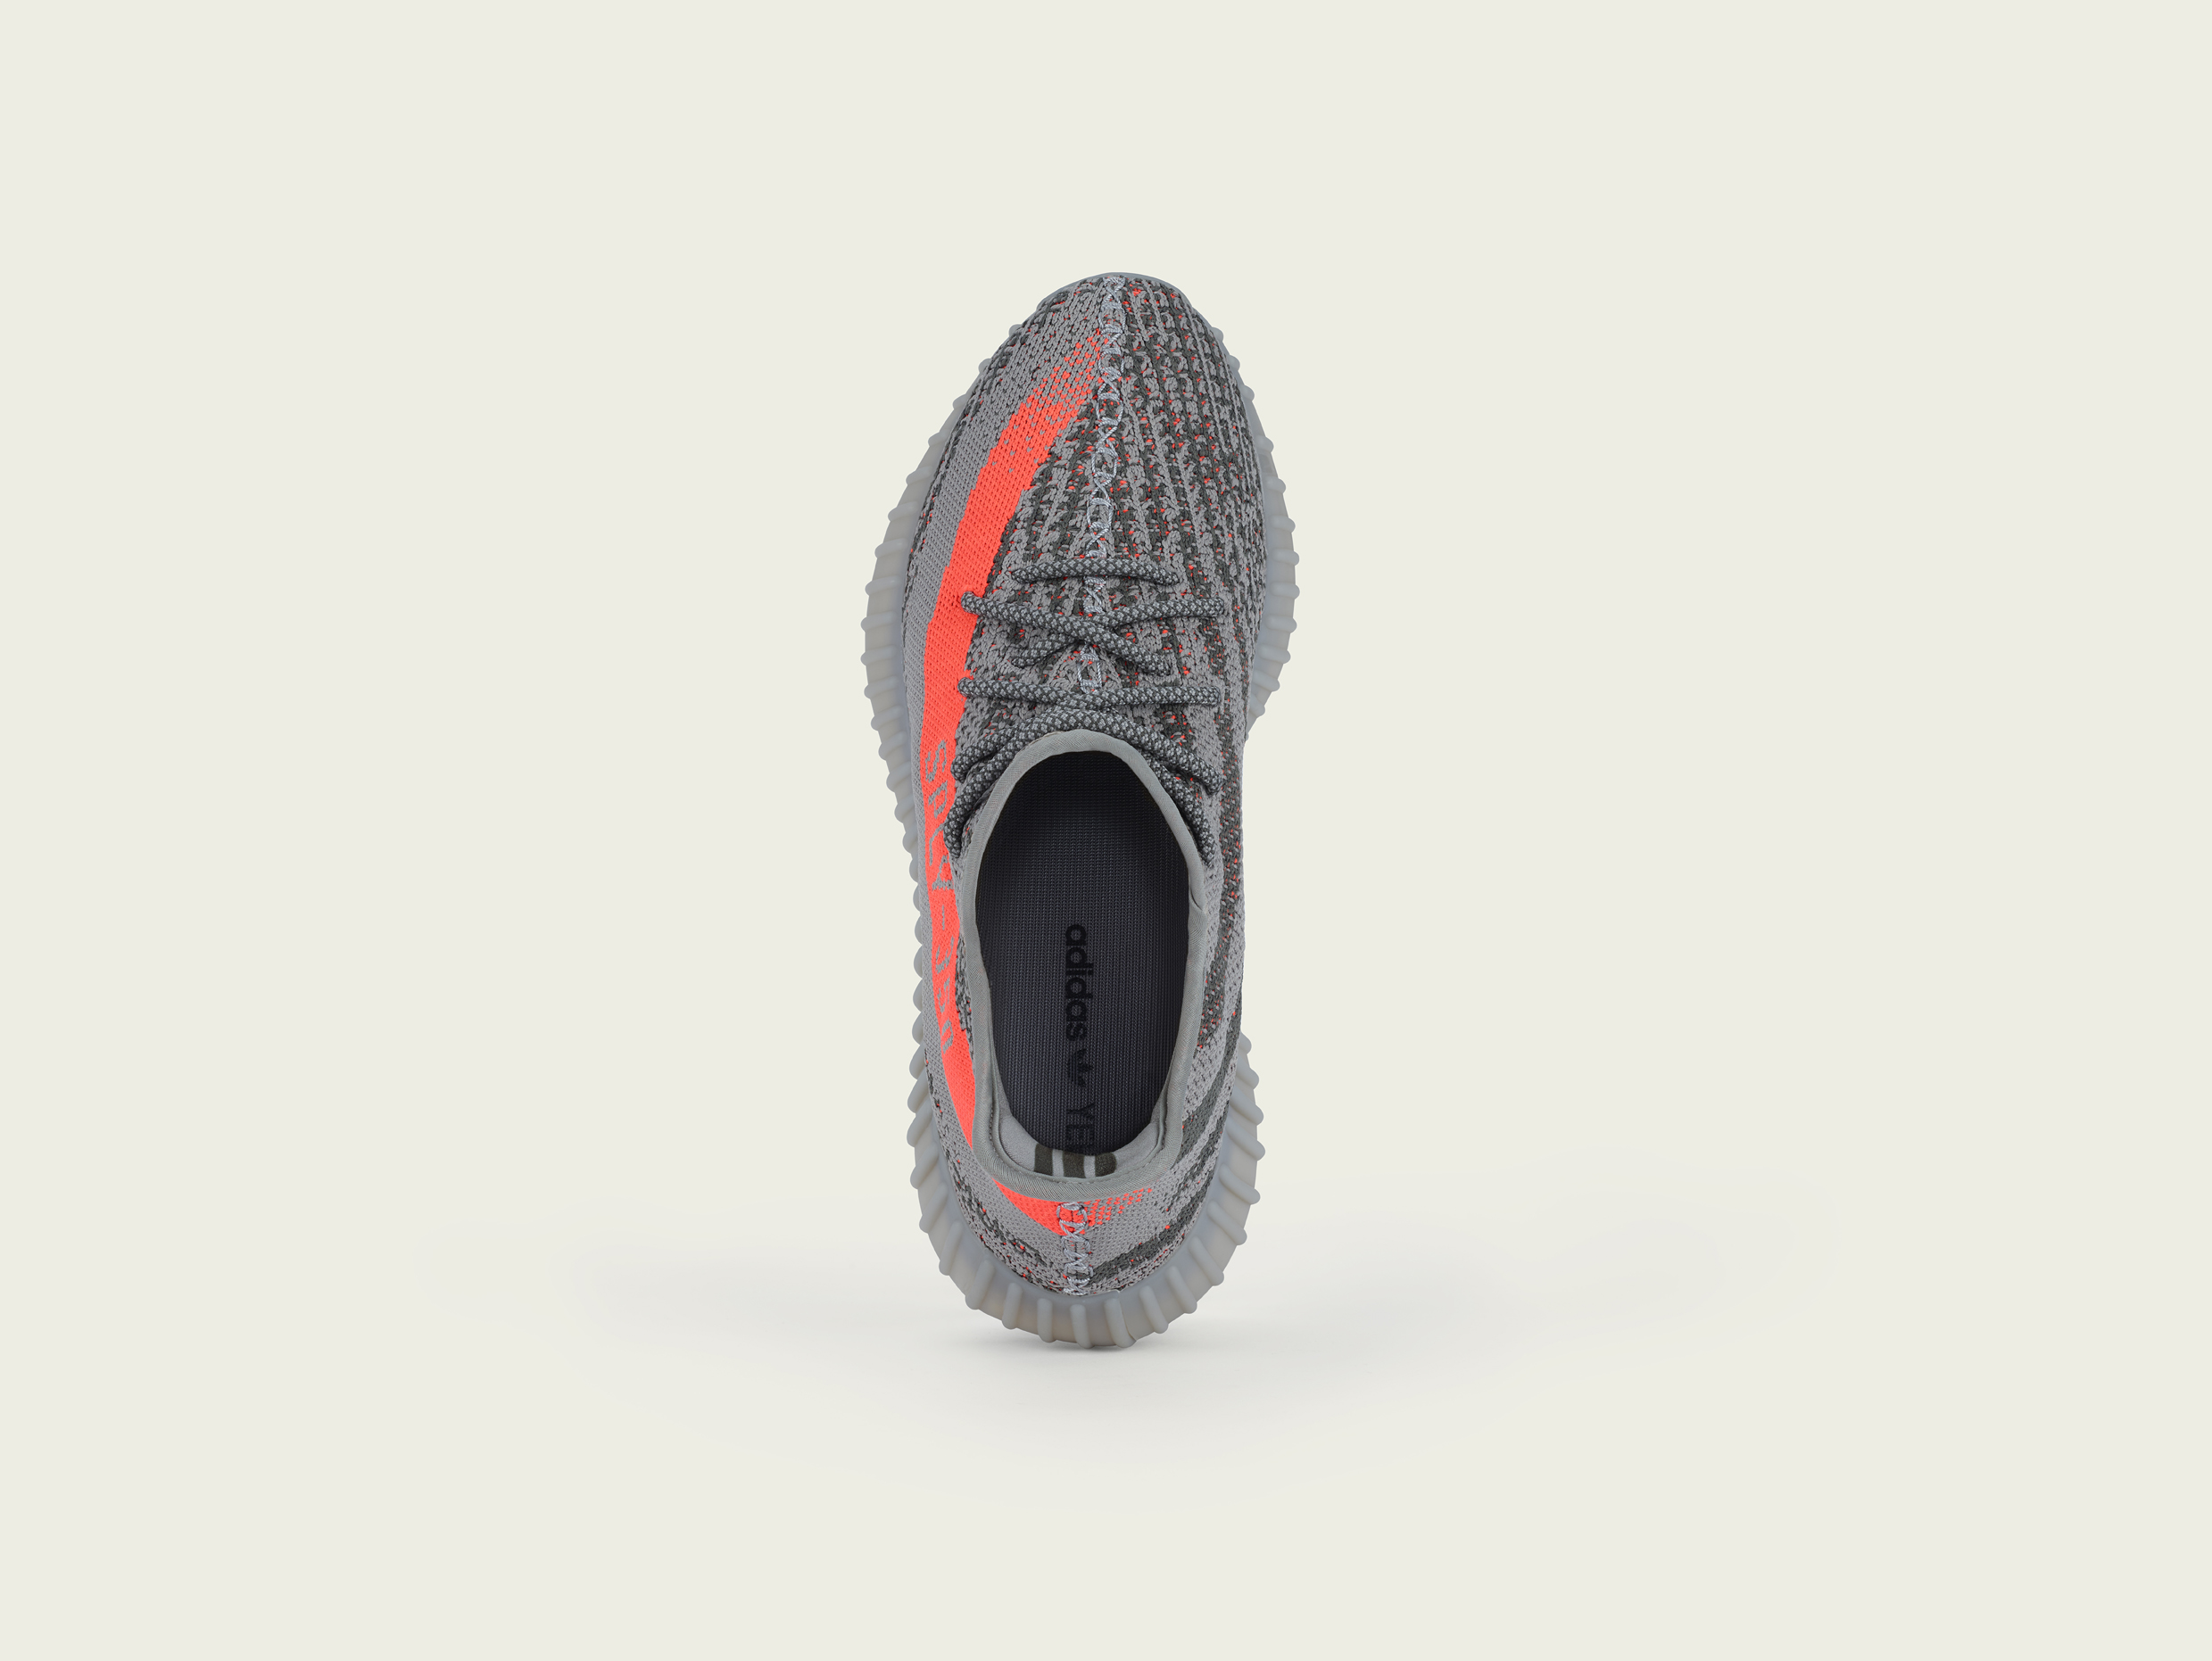 sole of yeezy boost 350